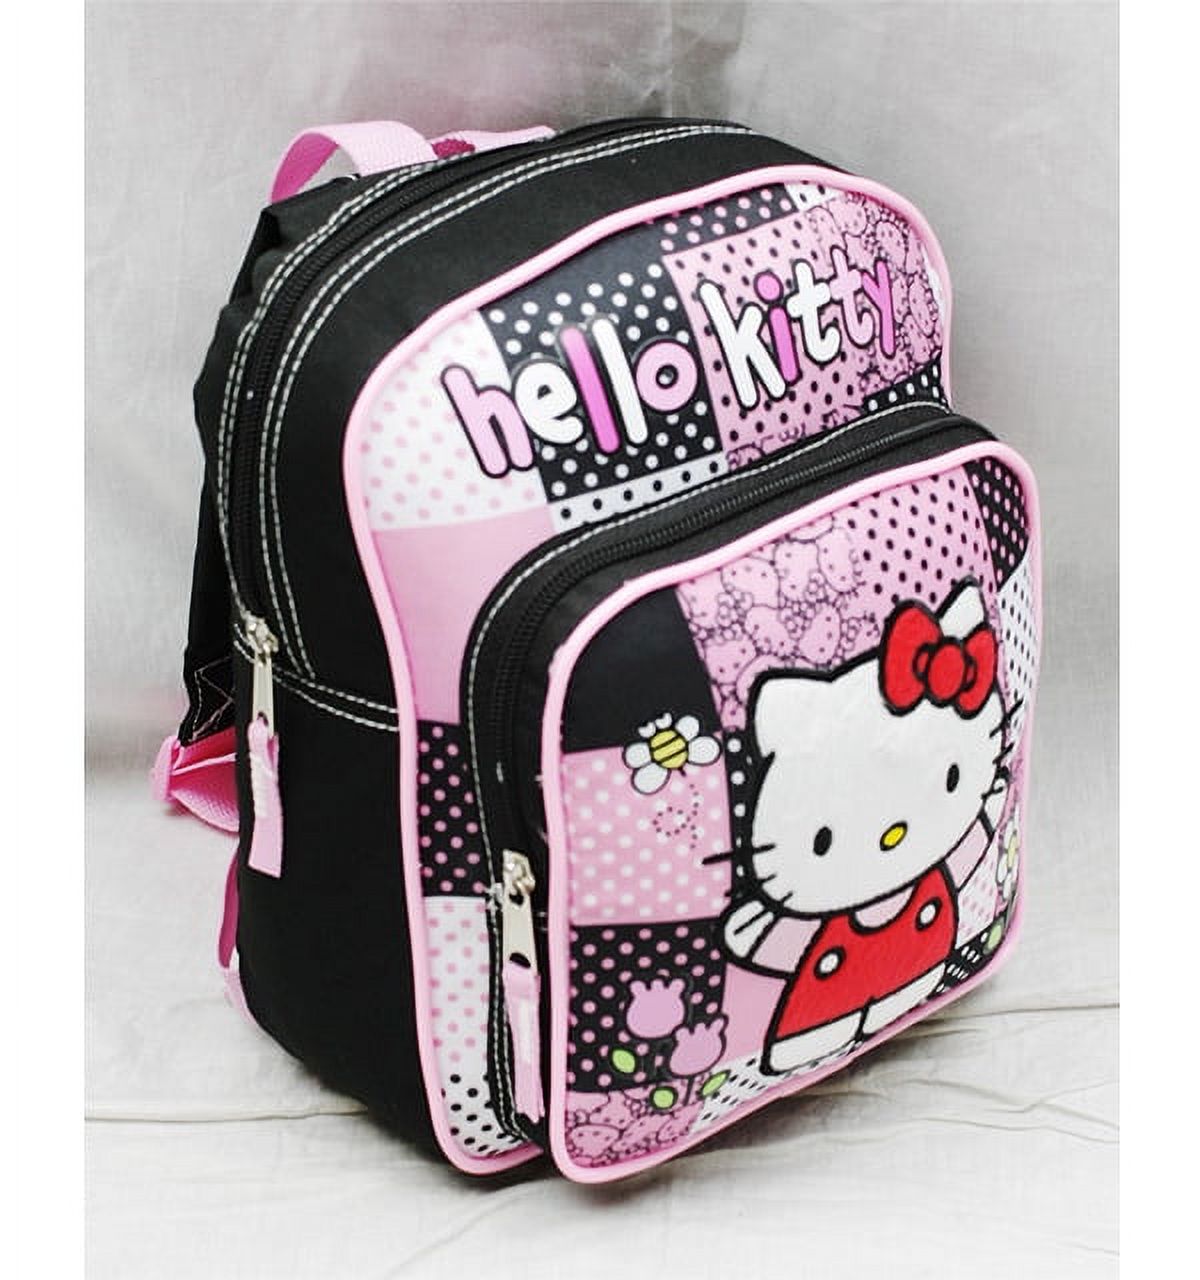 Mini Backpack - - Pink/Red Box New School Bag Book Girls 82513 - image 2 of 3